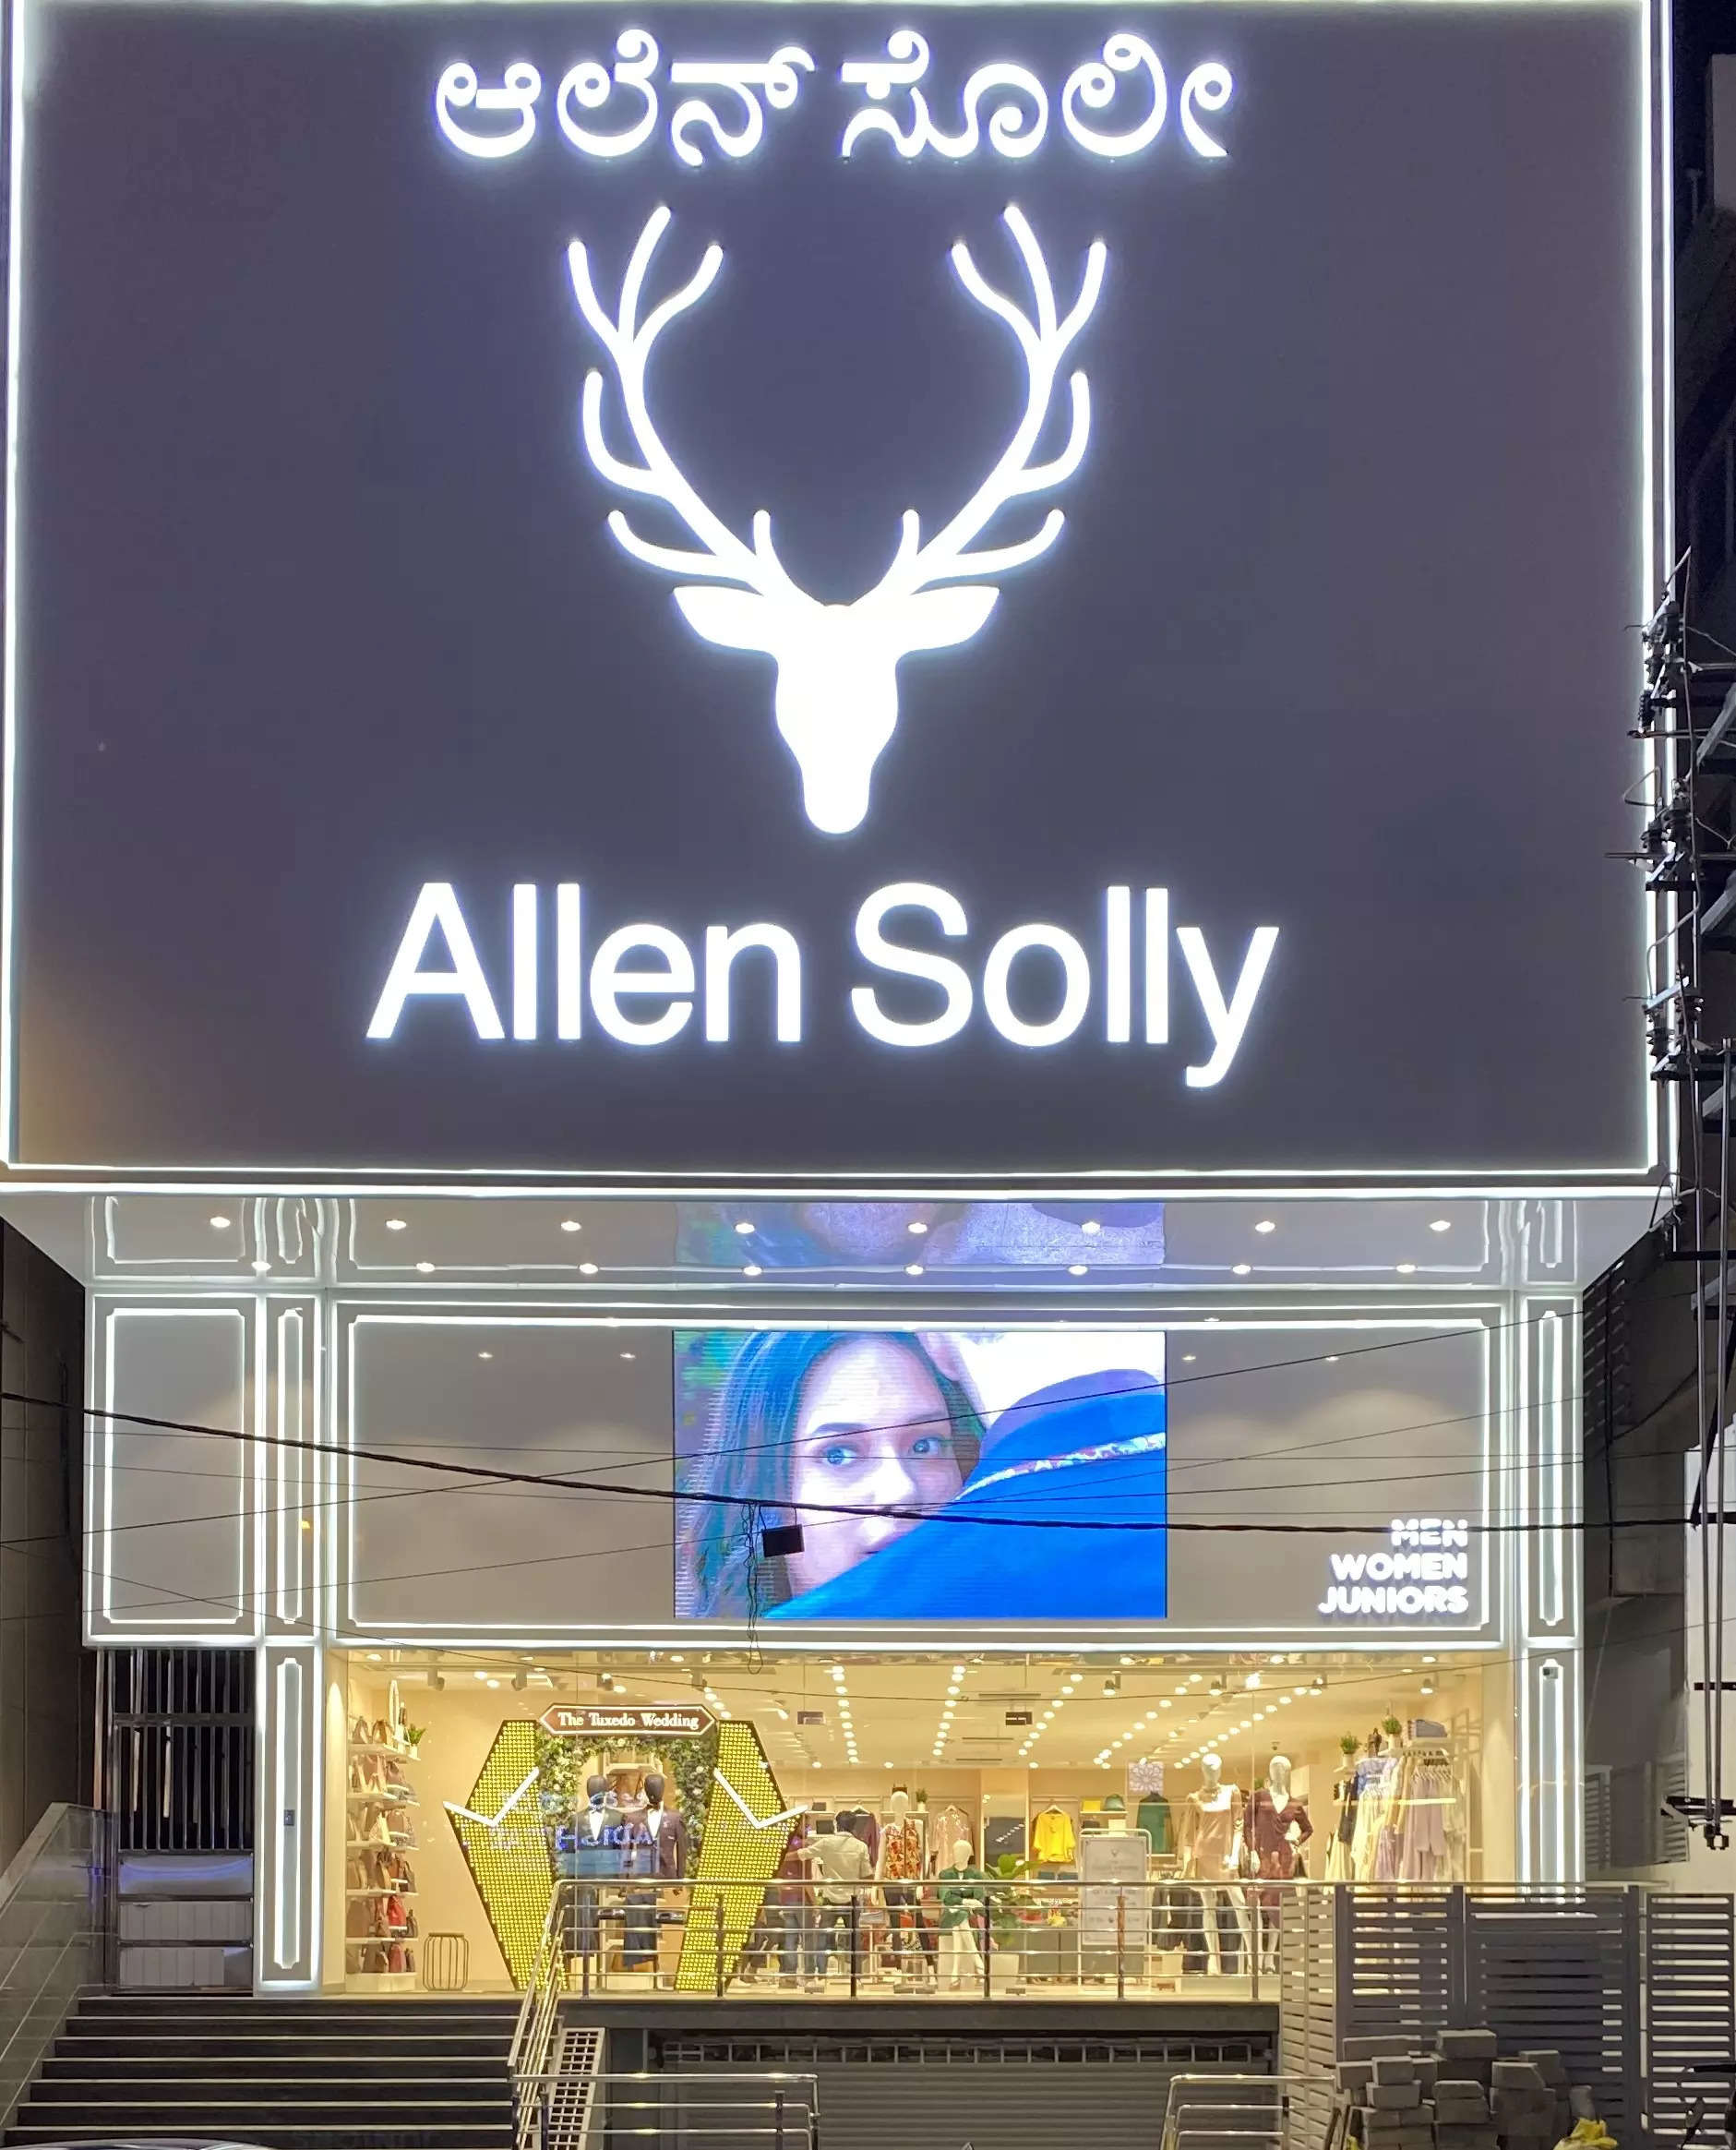 ABFRL's Allen Solly launches largest flagship store in Bengaluru